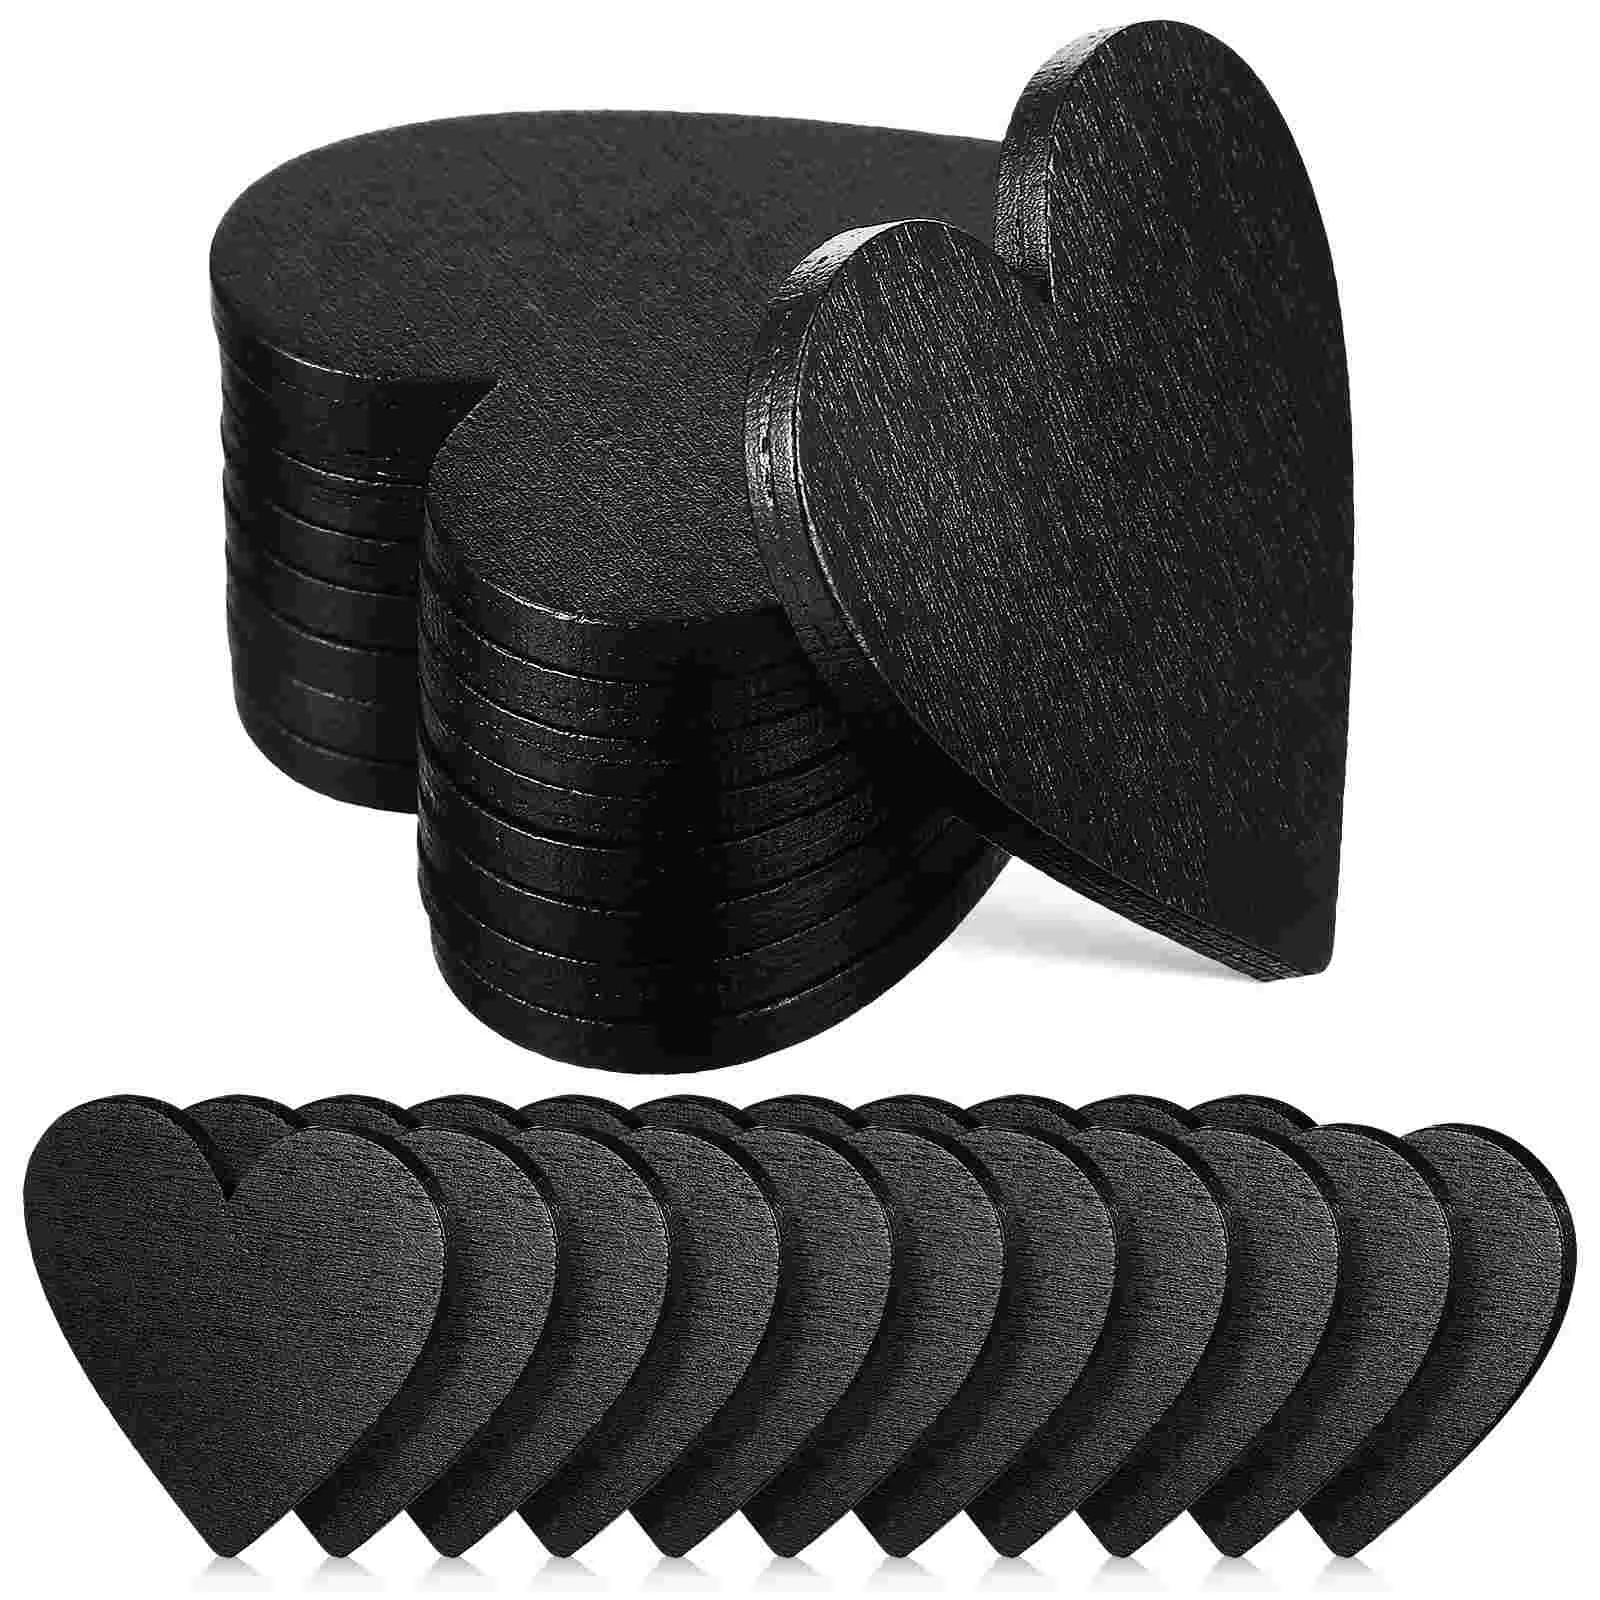 

20 Pcs Heart Shaped Blackboard Wood Hearts Small Woodsy Decor Wooden Discs for Crafting